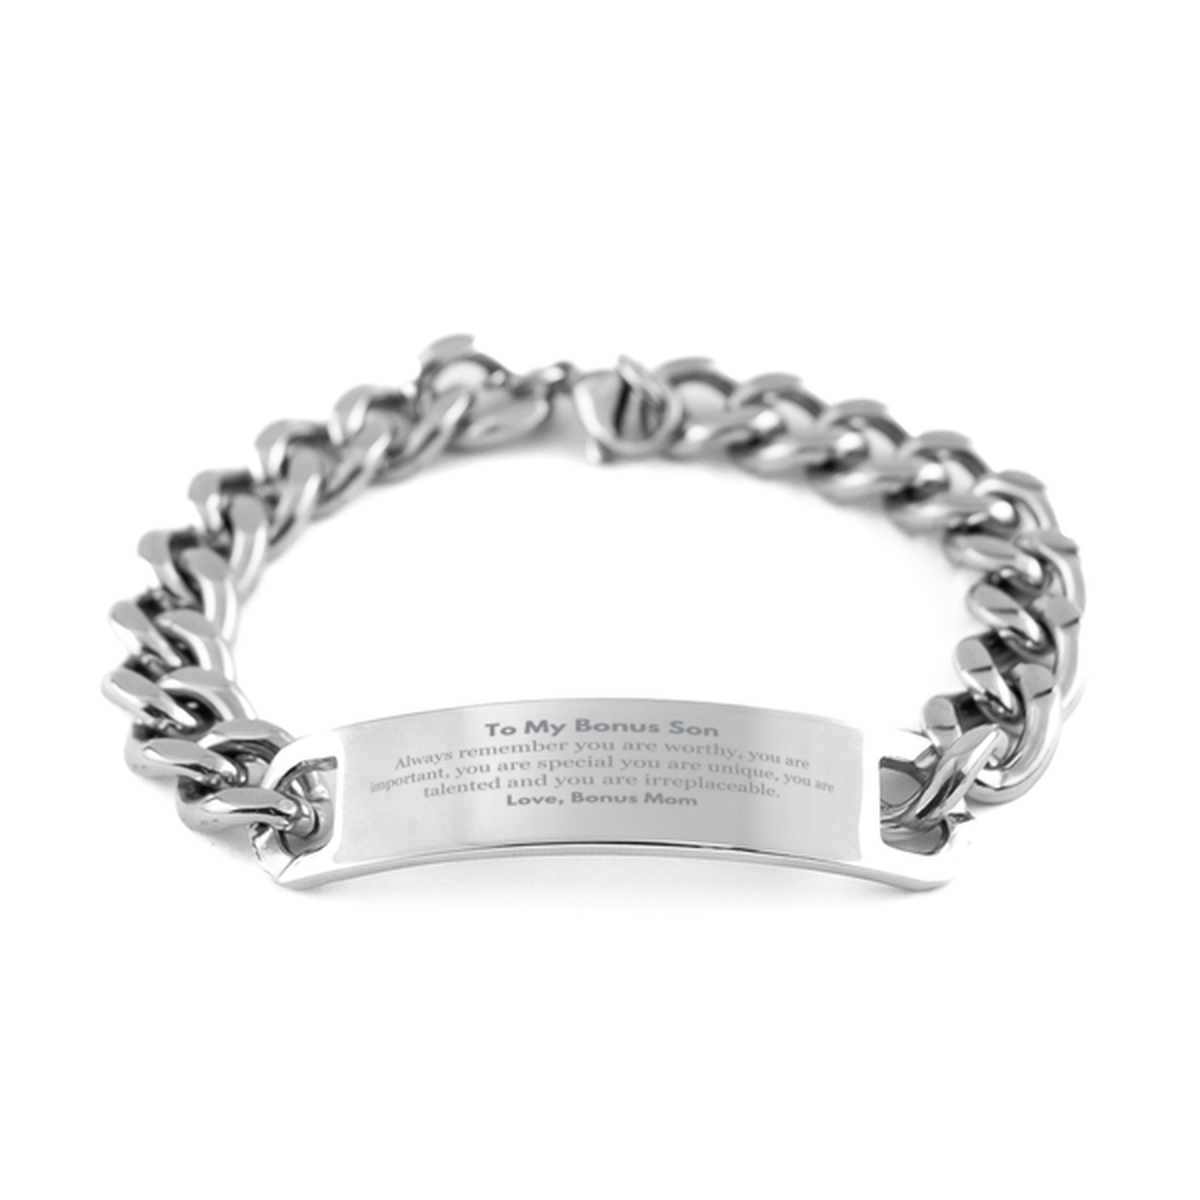 Bonus Son Birthday Gifts from Bonus Mom, Inspirational Cuban Chain Stainless Steel Bracelet for Bonus Son Christmas Graduation Gifts for Bonus Son Always remember you are worthy, you are important. Love, Bonus Mom